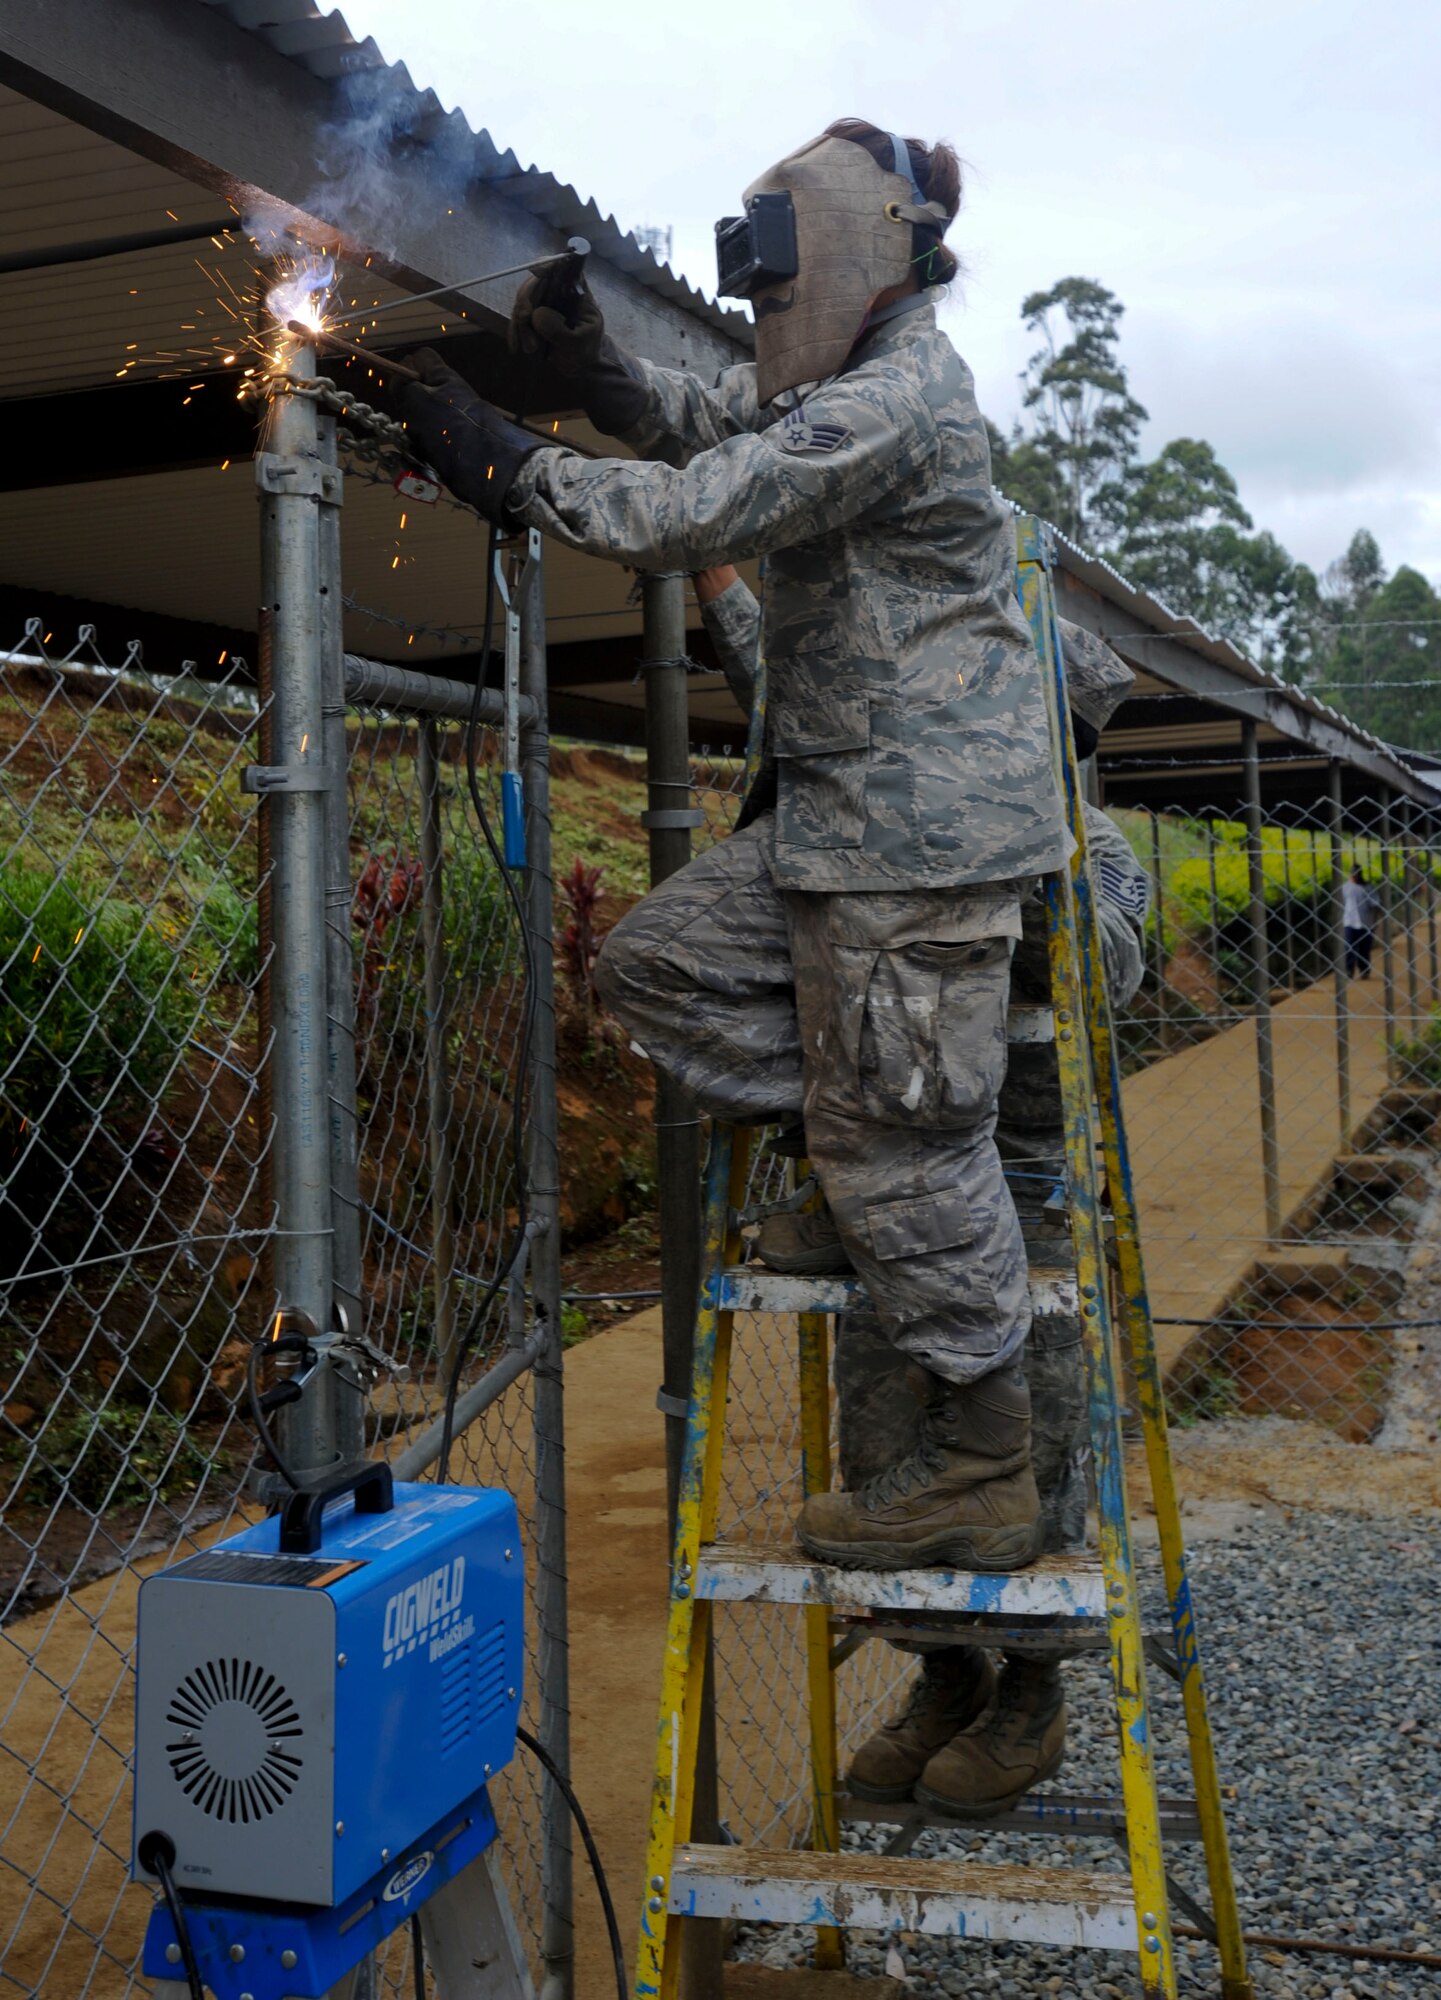 Senior Airman Jennie Abbott, Hawaii Air National Guard 154th Civil Engineer Squadron heavy equipment operator, welds rebar to a fence during Pacific Unity 14-8 in Mount Hagen, Papua New Guinea. As part of Pacific Unity the unit has been working on the construction of two new dormitories for female students, as well as performing other renovations and maintenance around the school. PACUNITY helps cultivate common bonds and fosters goodwill between the U.S. and regional nations through multi-lateral humanitarian assistance and civil military operations.  (U.S. Air Force photo by Tech. Sgt. Terri Paden/Released)                               